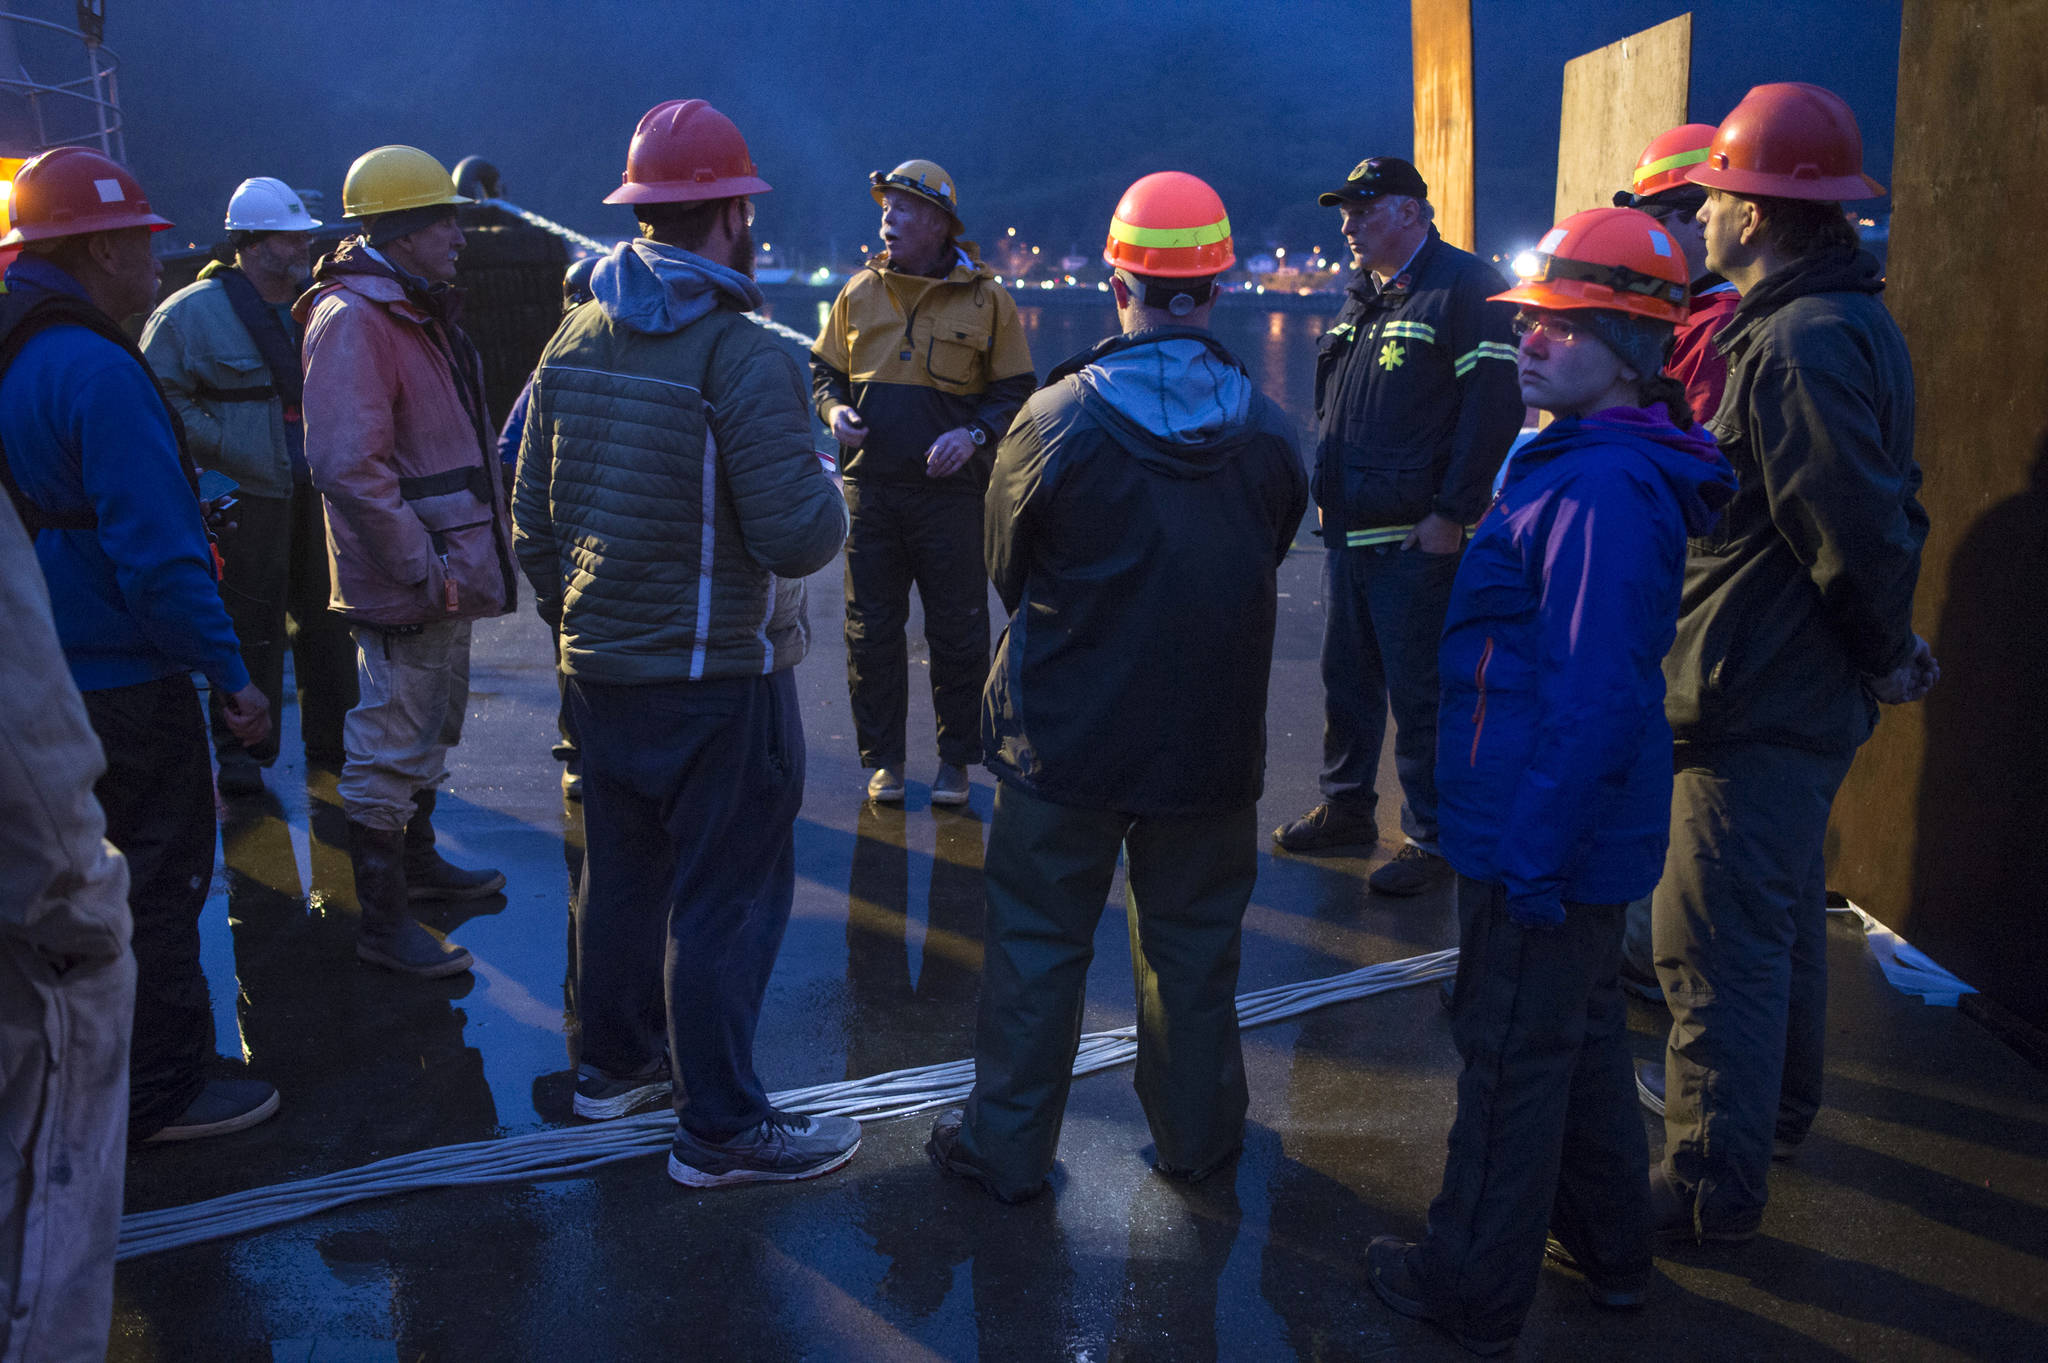 Gary Stambaugh, center, leads a safety briefing with volunteers before the annual city-funded fireworks show in Juneau’s downtown harbor on Tuesday, July 3, 2017. (Michael Penn | Juneau Empire)